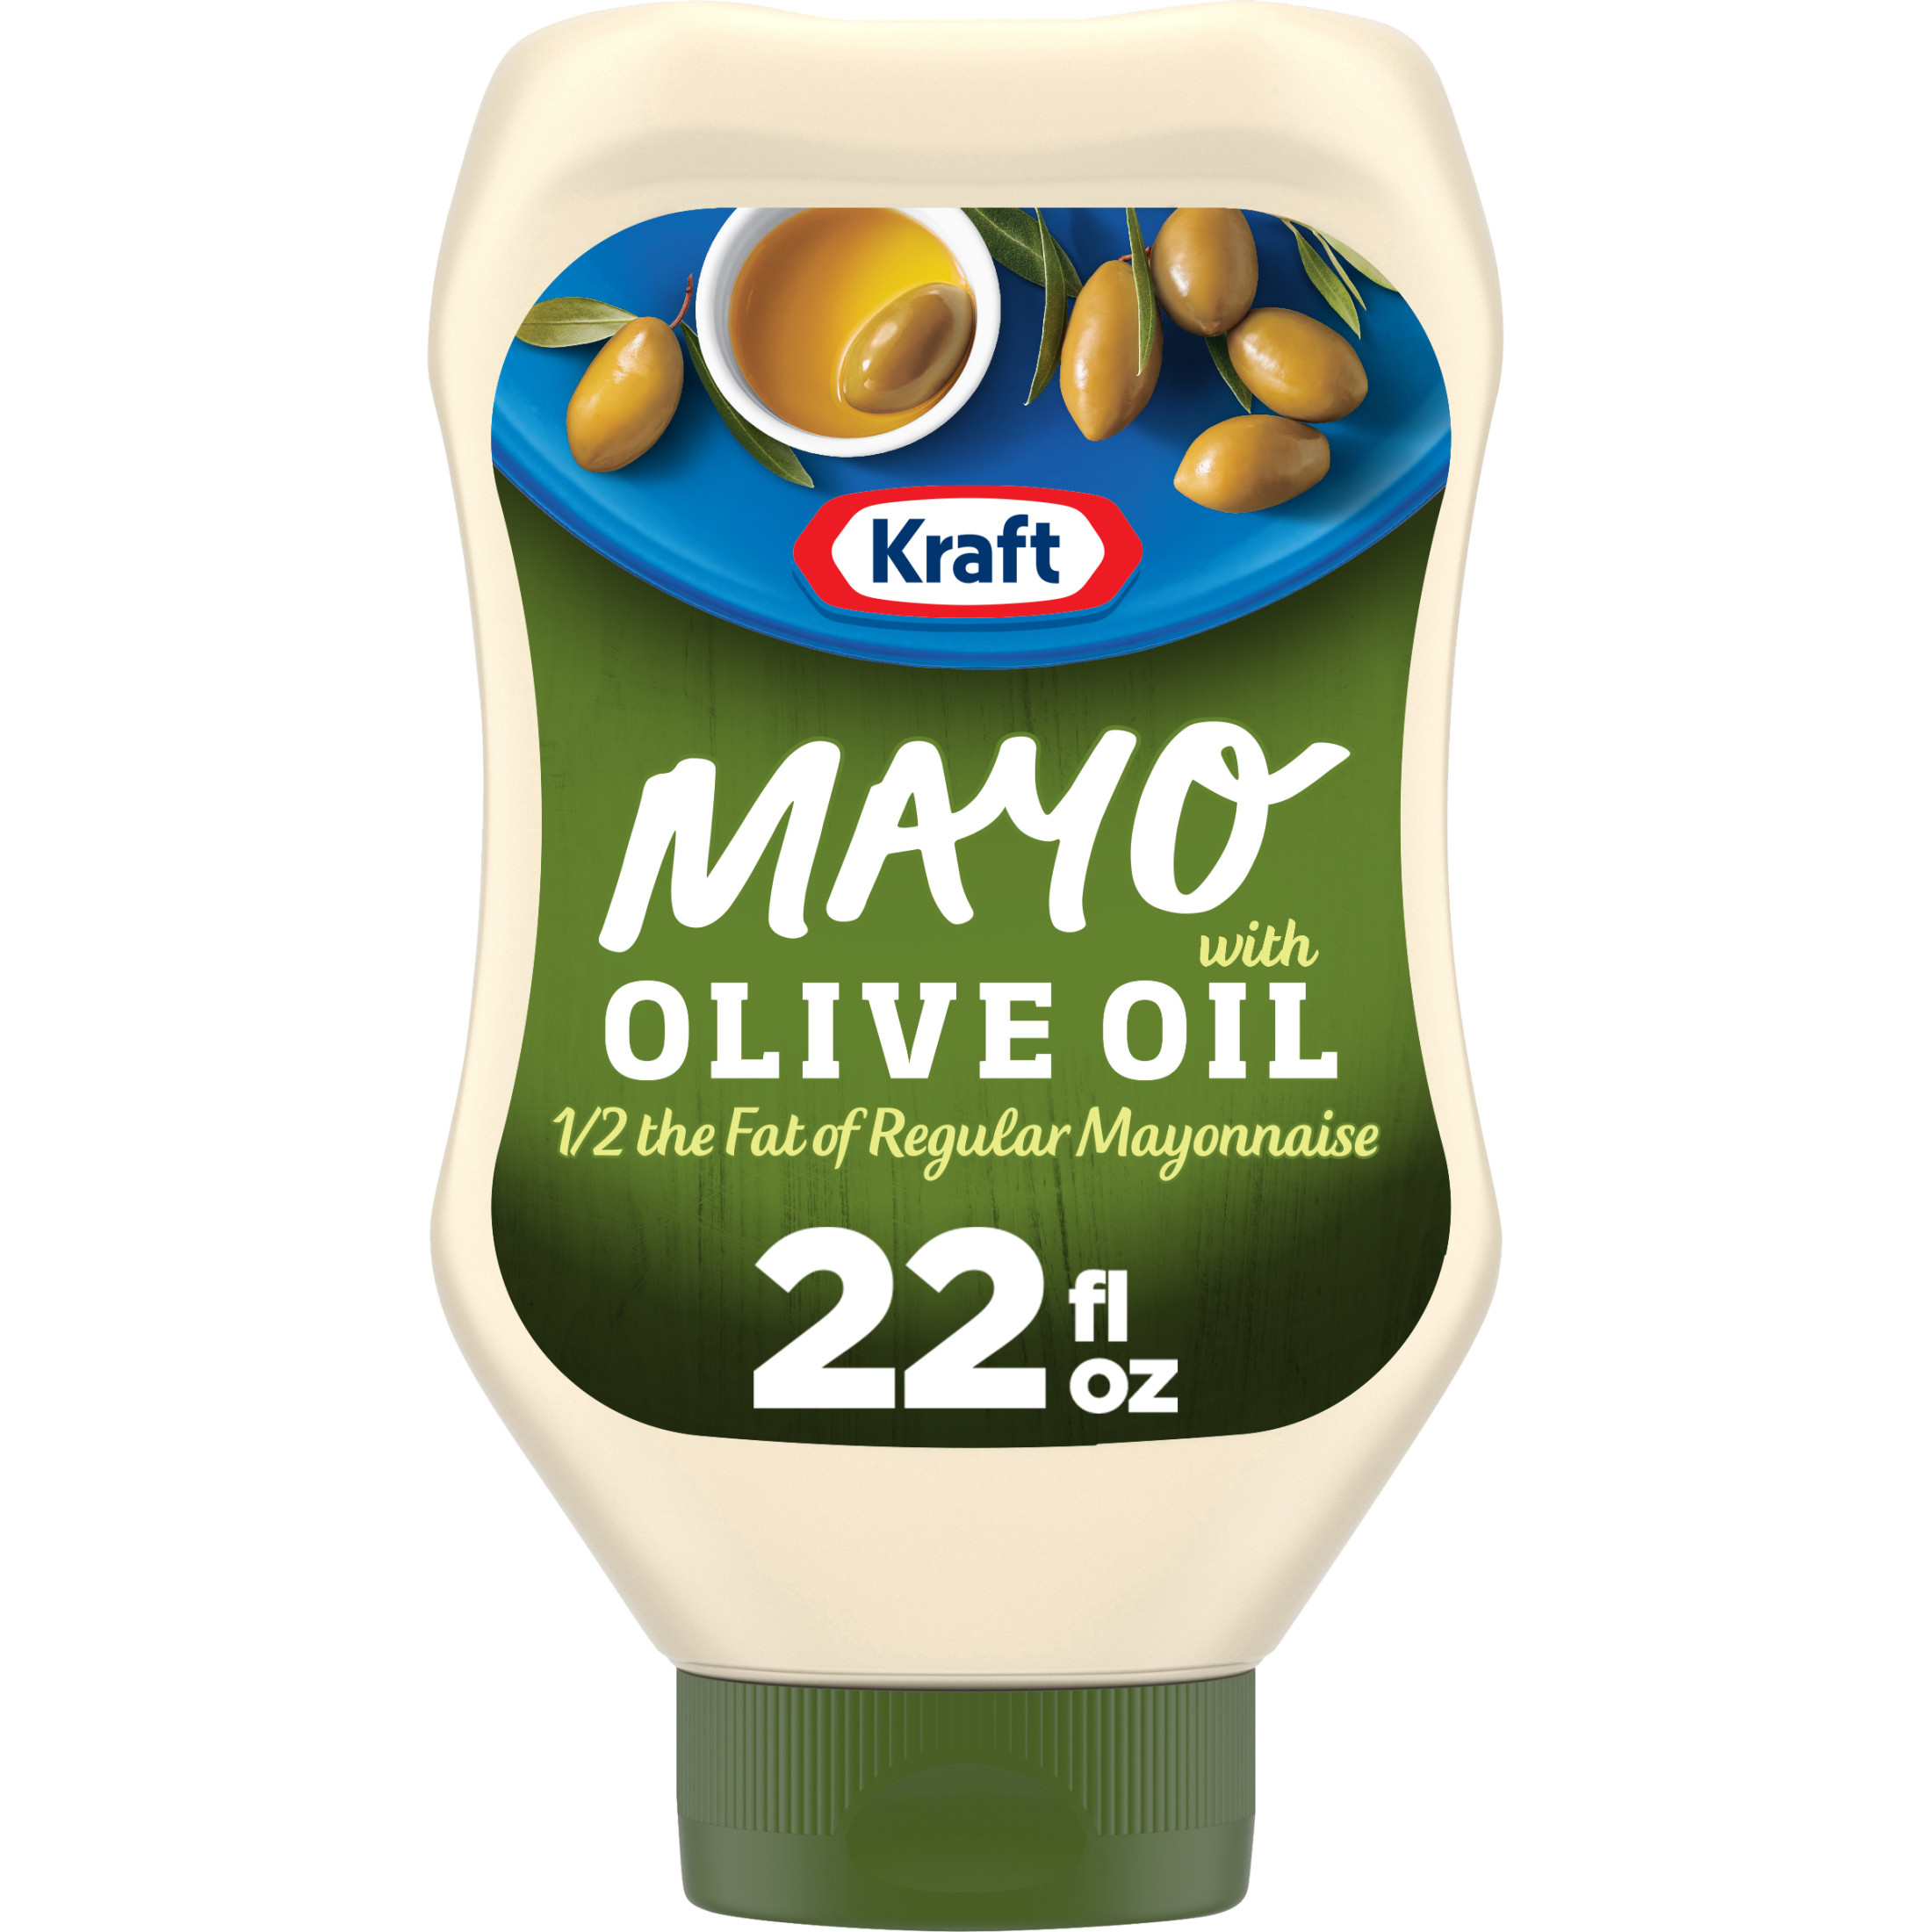 Kraft Mayo with Olive Oil Reduced Fat Mayonnaise Squeeze Bottle, 22 fl oz - image 1 of 13